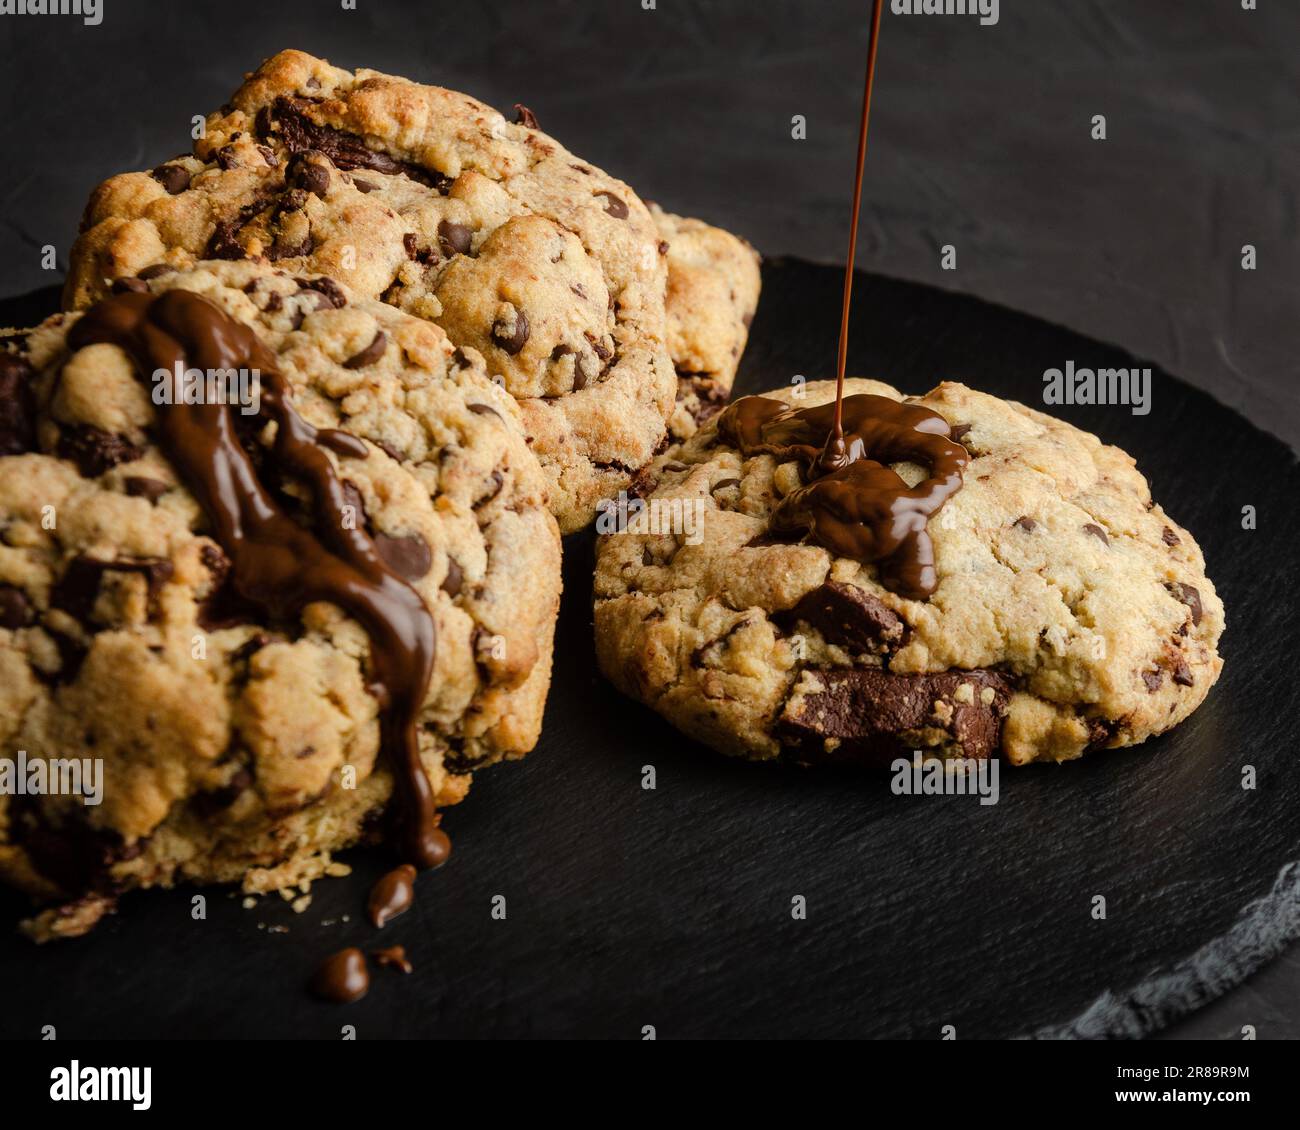 Chocolate chip cookies with chocolate syrup, on black background Stock Photo